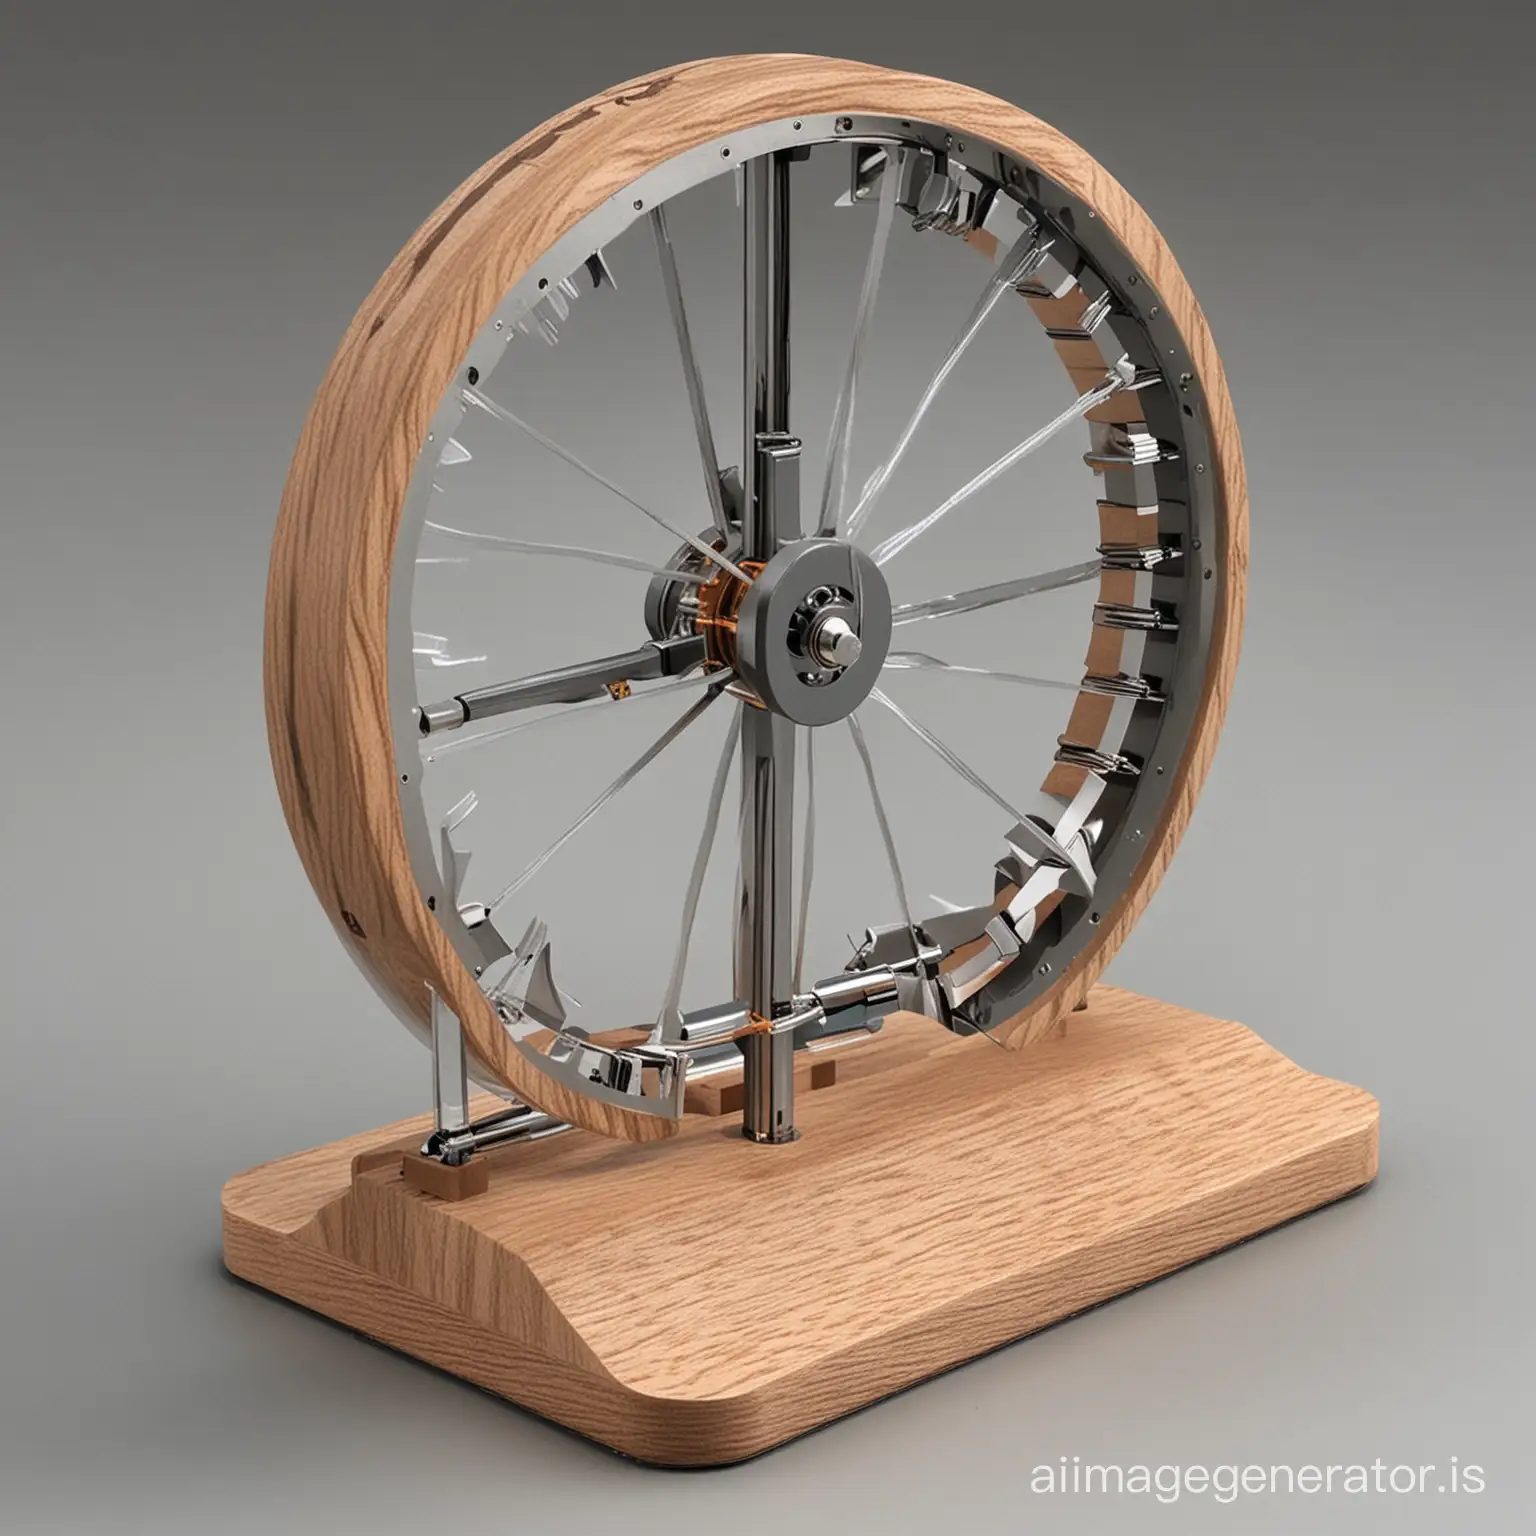 Innovative-Perpetual-Motion-Machine-Powered-by-Repelling-Magnets